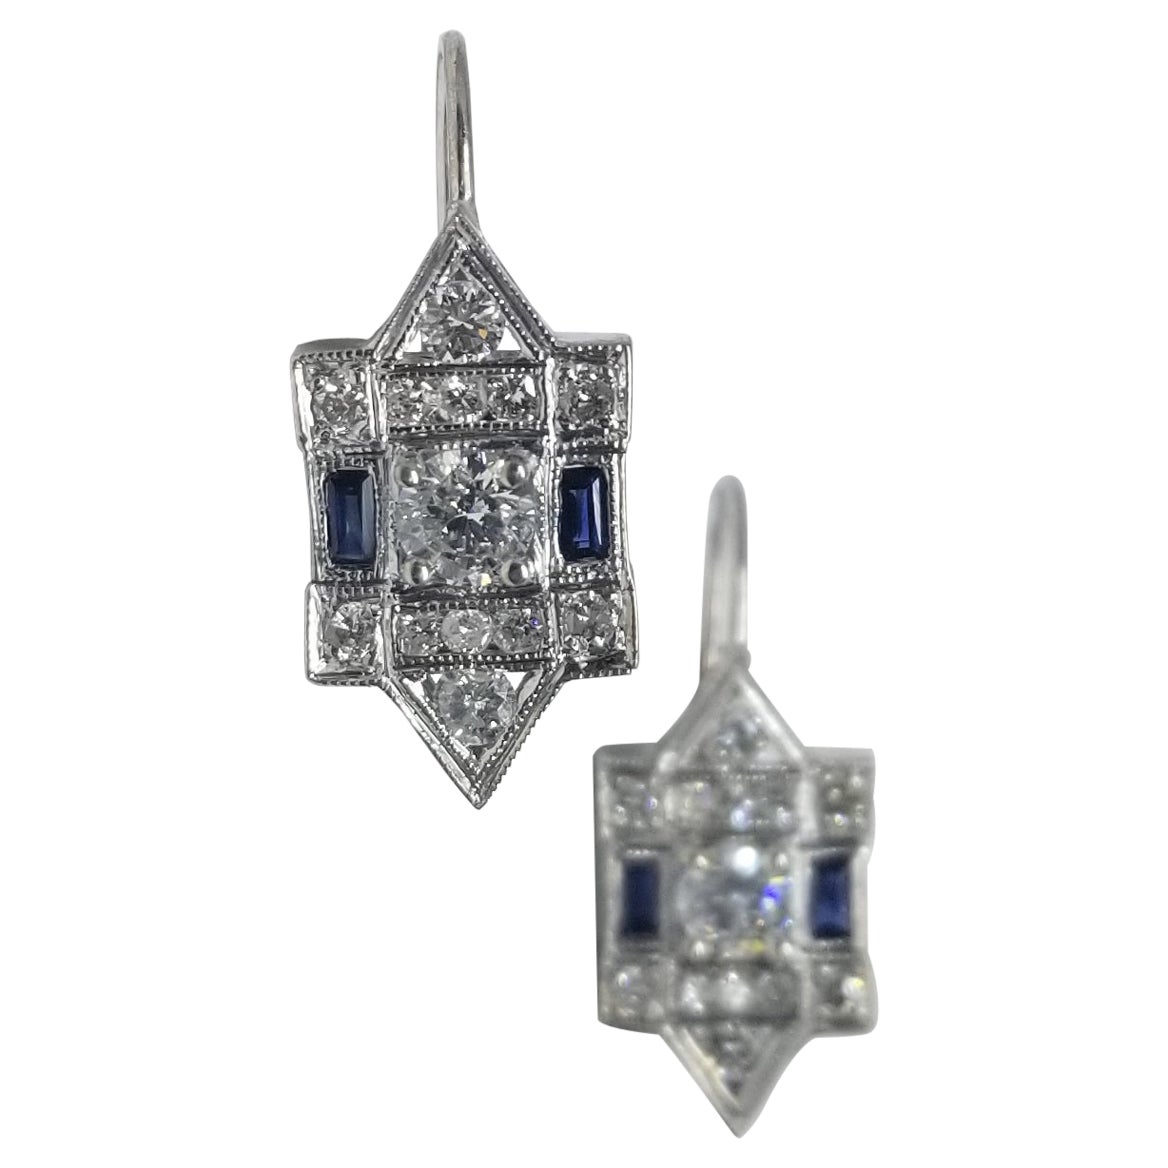 Classic Art Deco Style Inspired Earrings with Beautiful Diamonds and Sapphire S For Sale